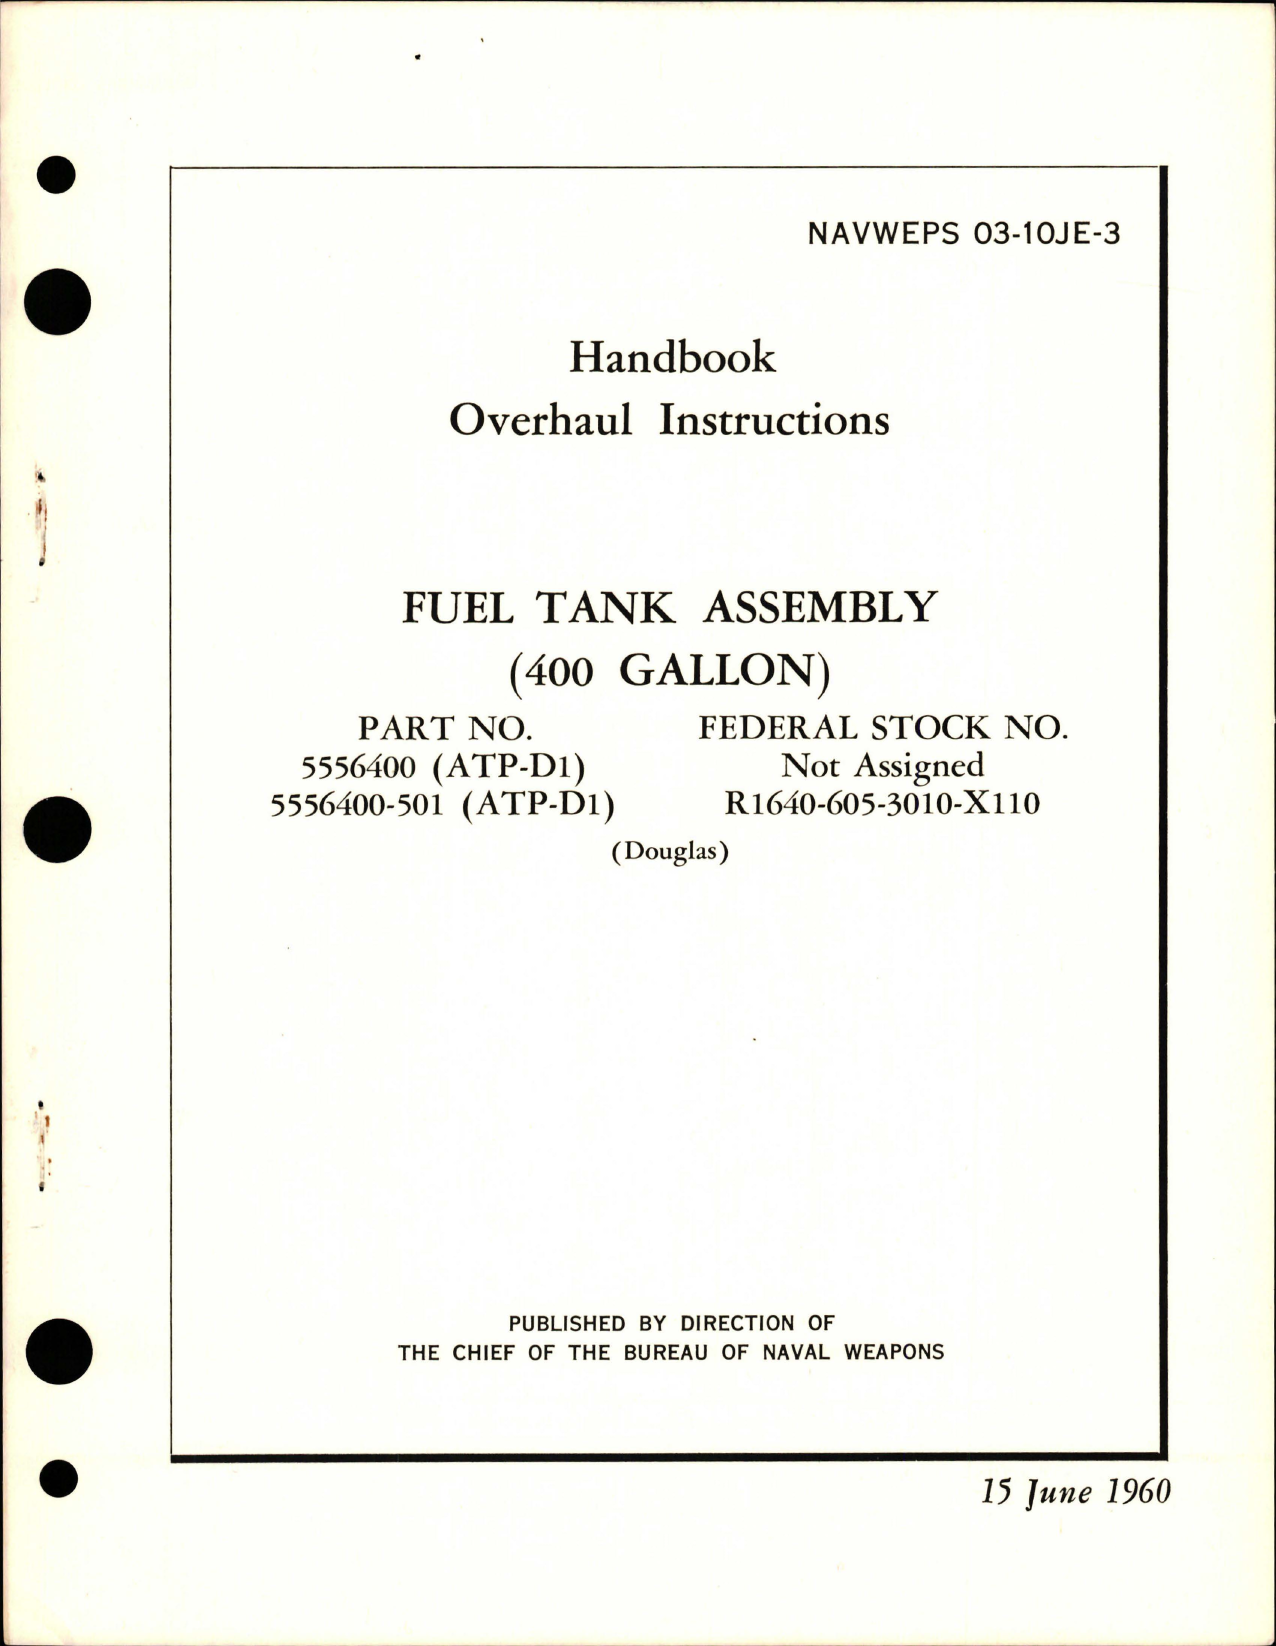 Sample page 1 from AirCorps Library document: Overhaul Instructions for 400 Gallon Fuel Tank - Parts 5556400 and 5556400-501